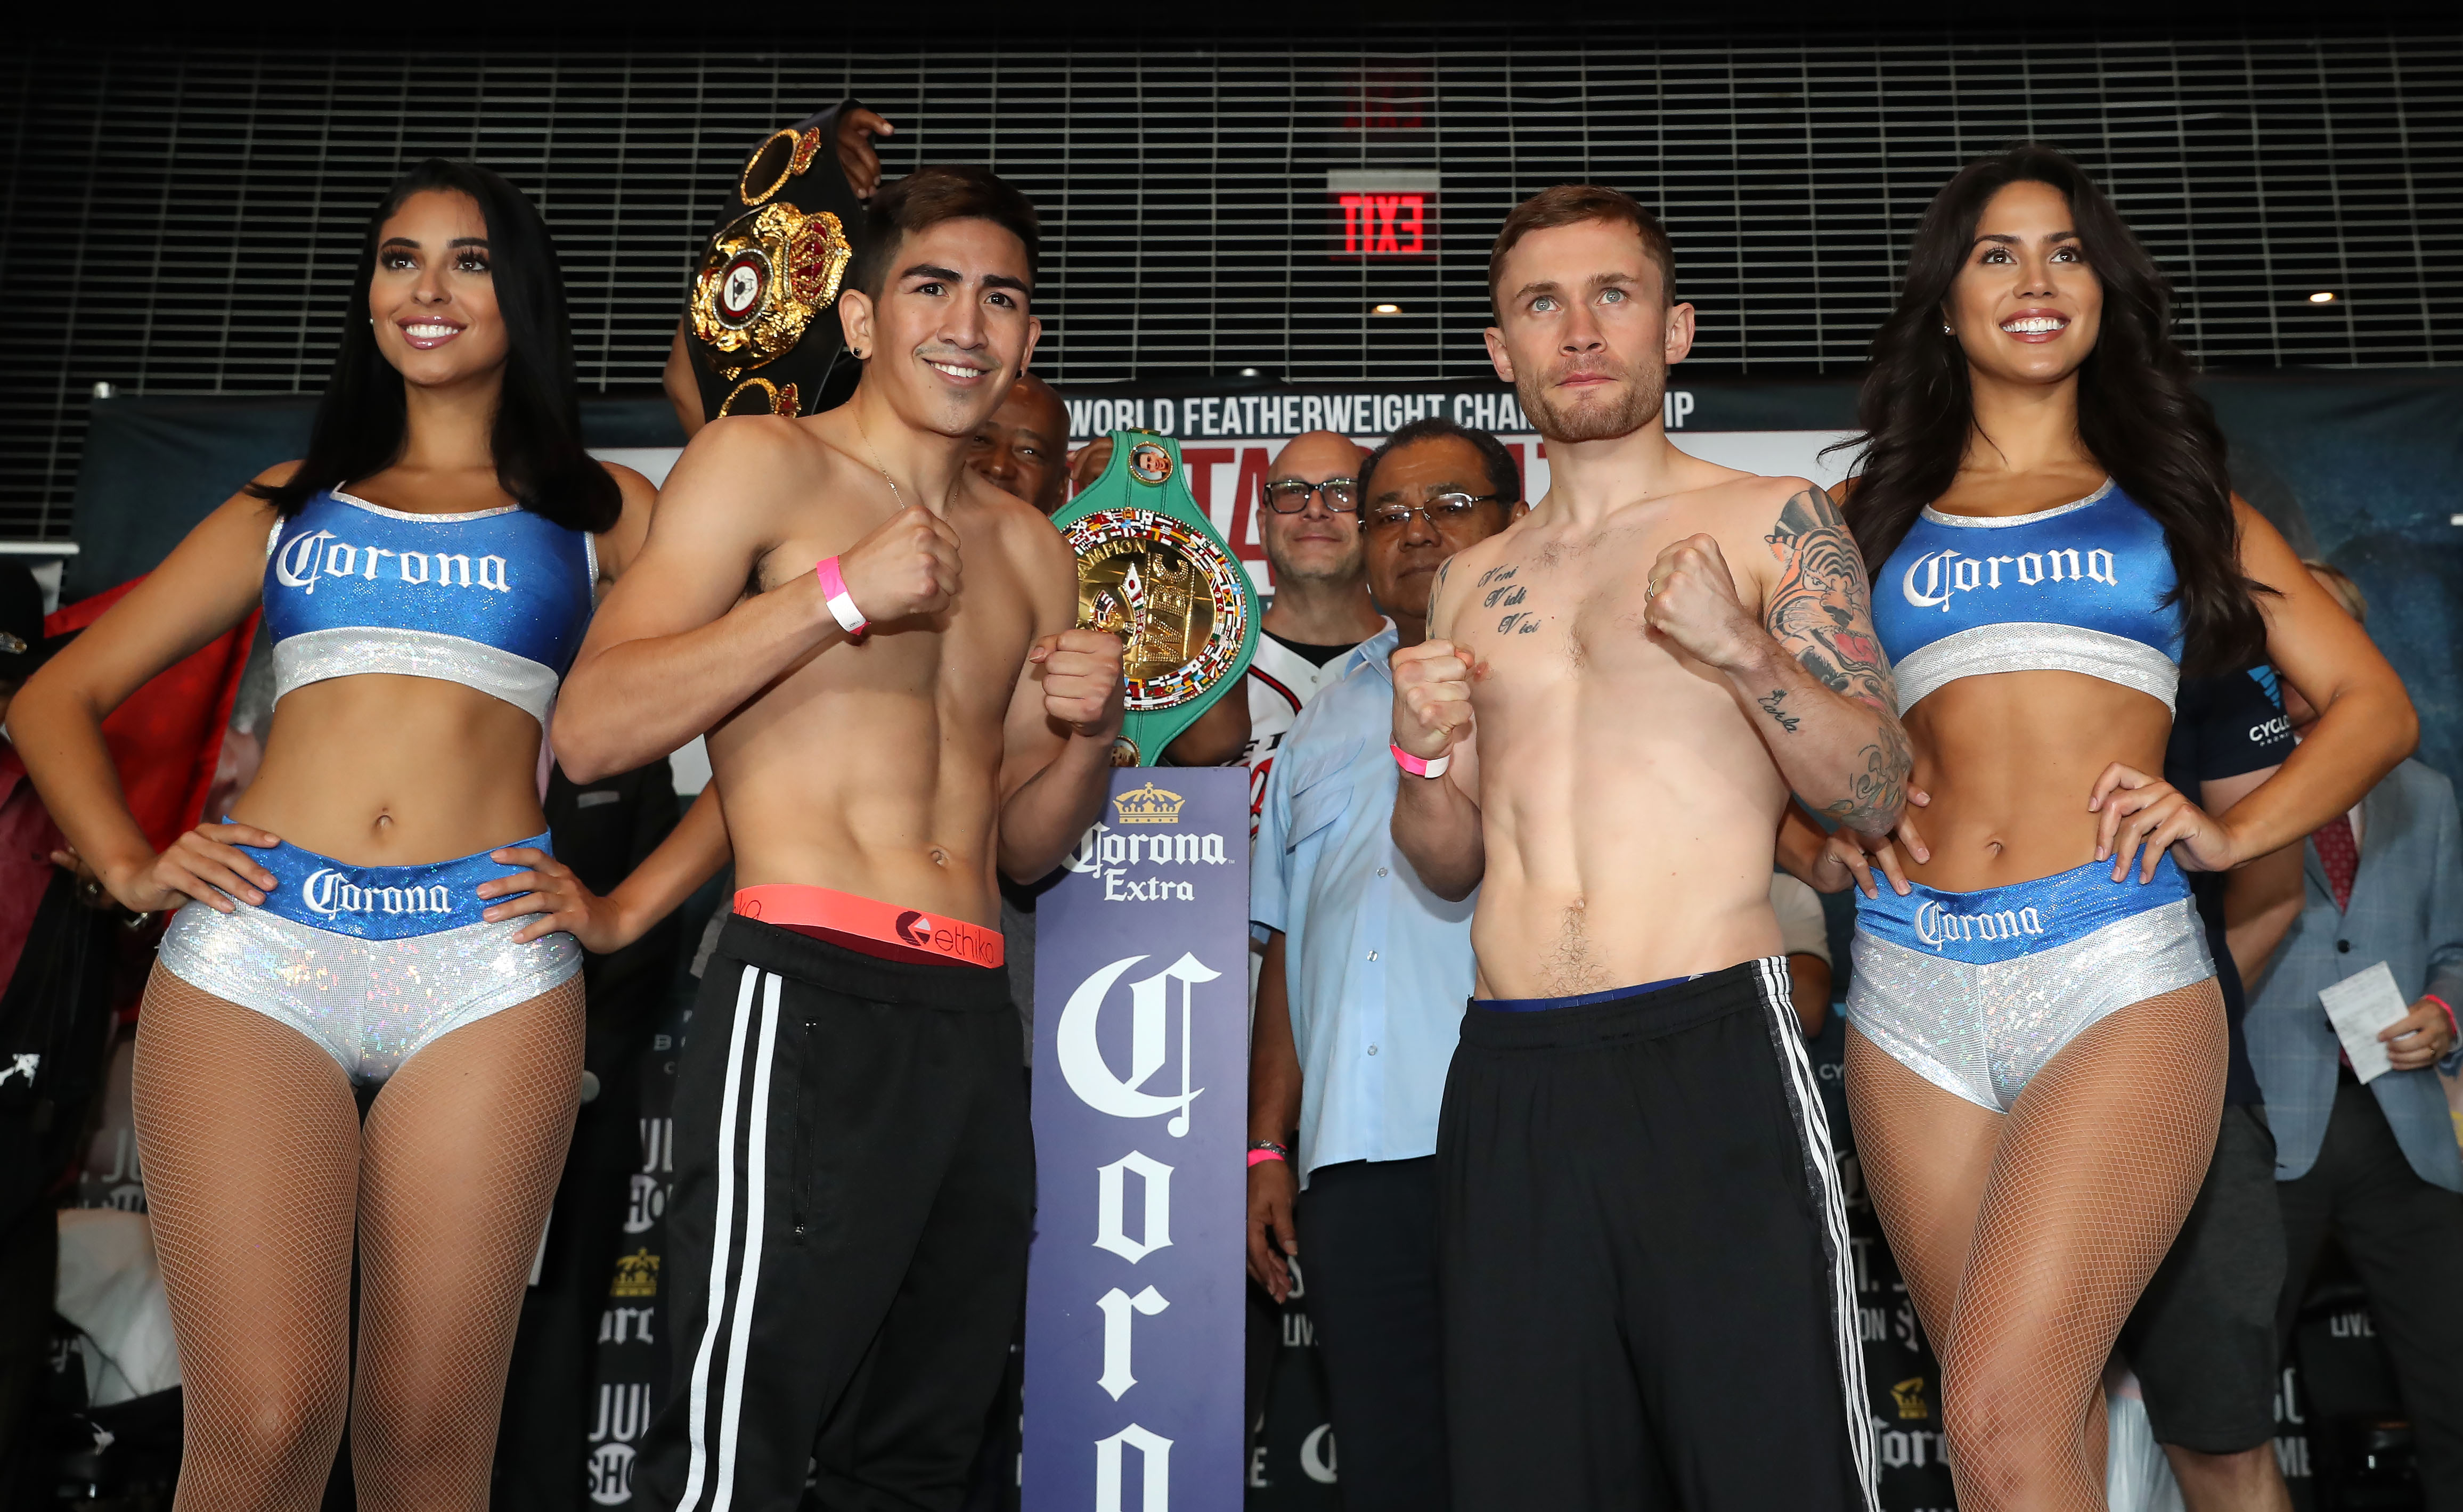 Leo Santa Cruz and Carl Frampton go head to head after the weigh-in at the Barclays Center’s Resorts World Casino ahead of the WBA World title bout at the Barclay Centre, Brooklyn, NY on Saturday night.